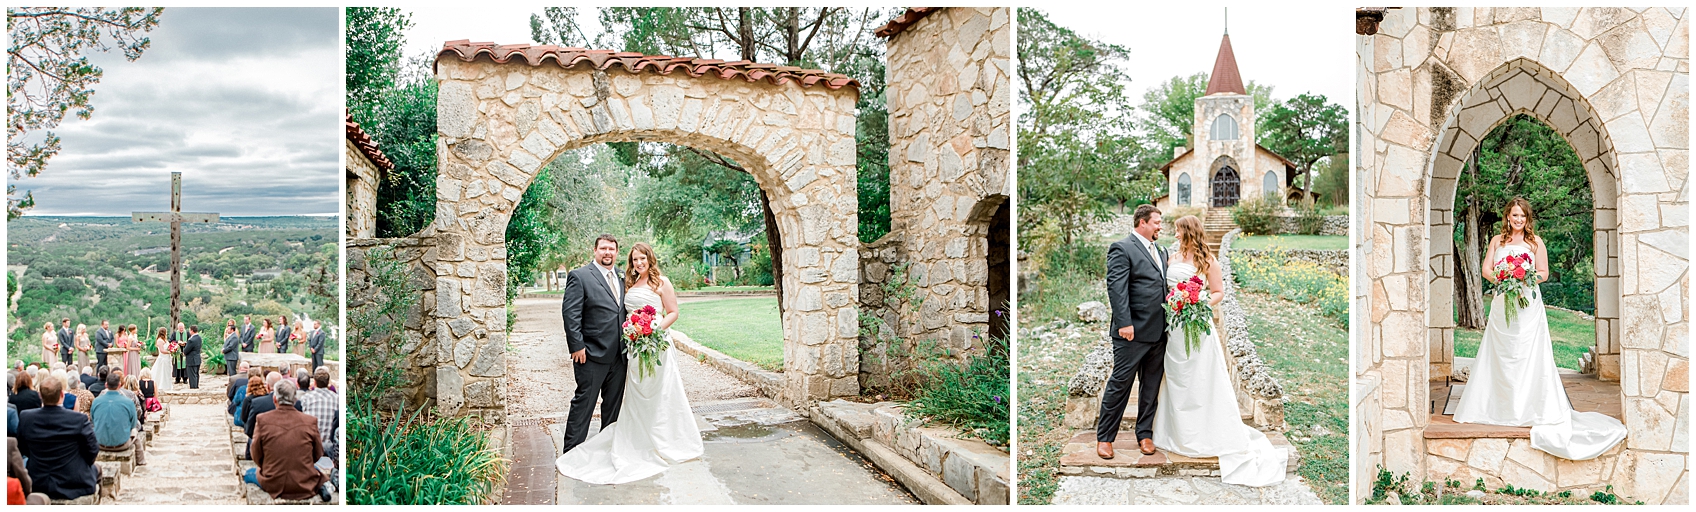 locations for elopements and micro intimate weddings in the texas hill country by allison jeffers photography 0005